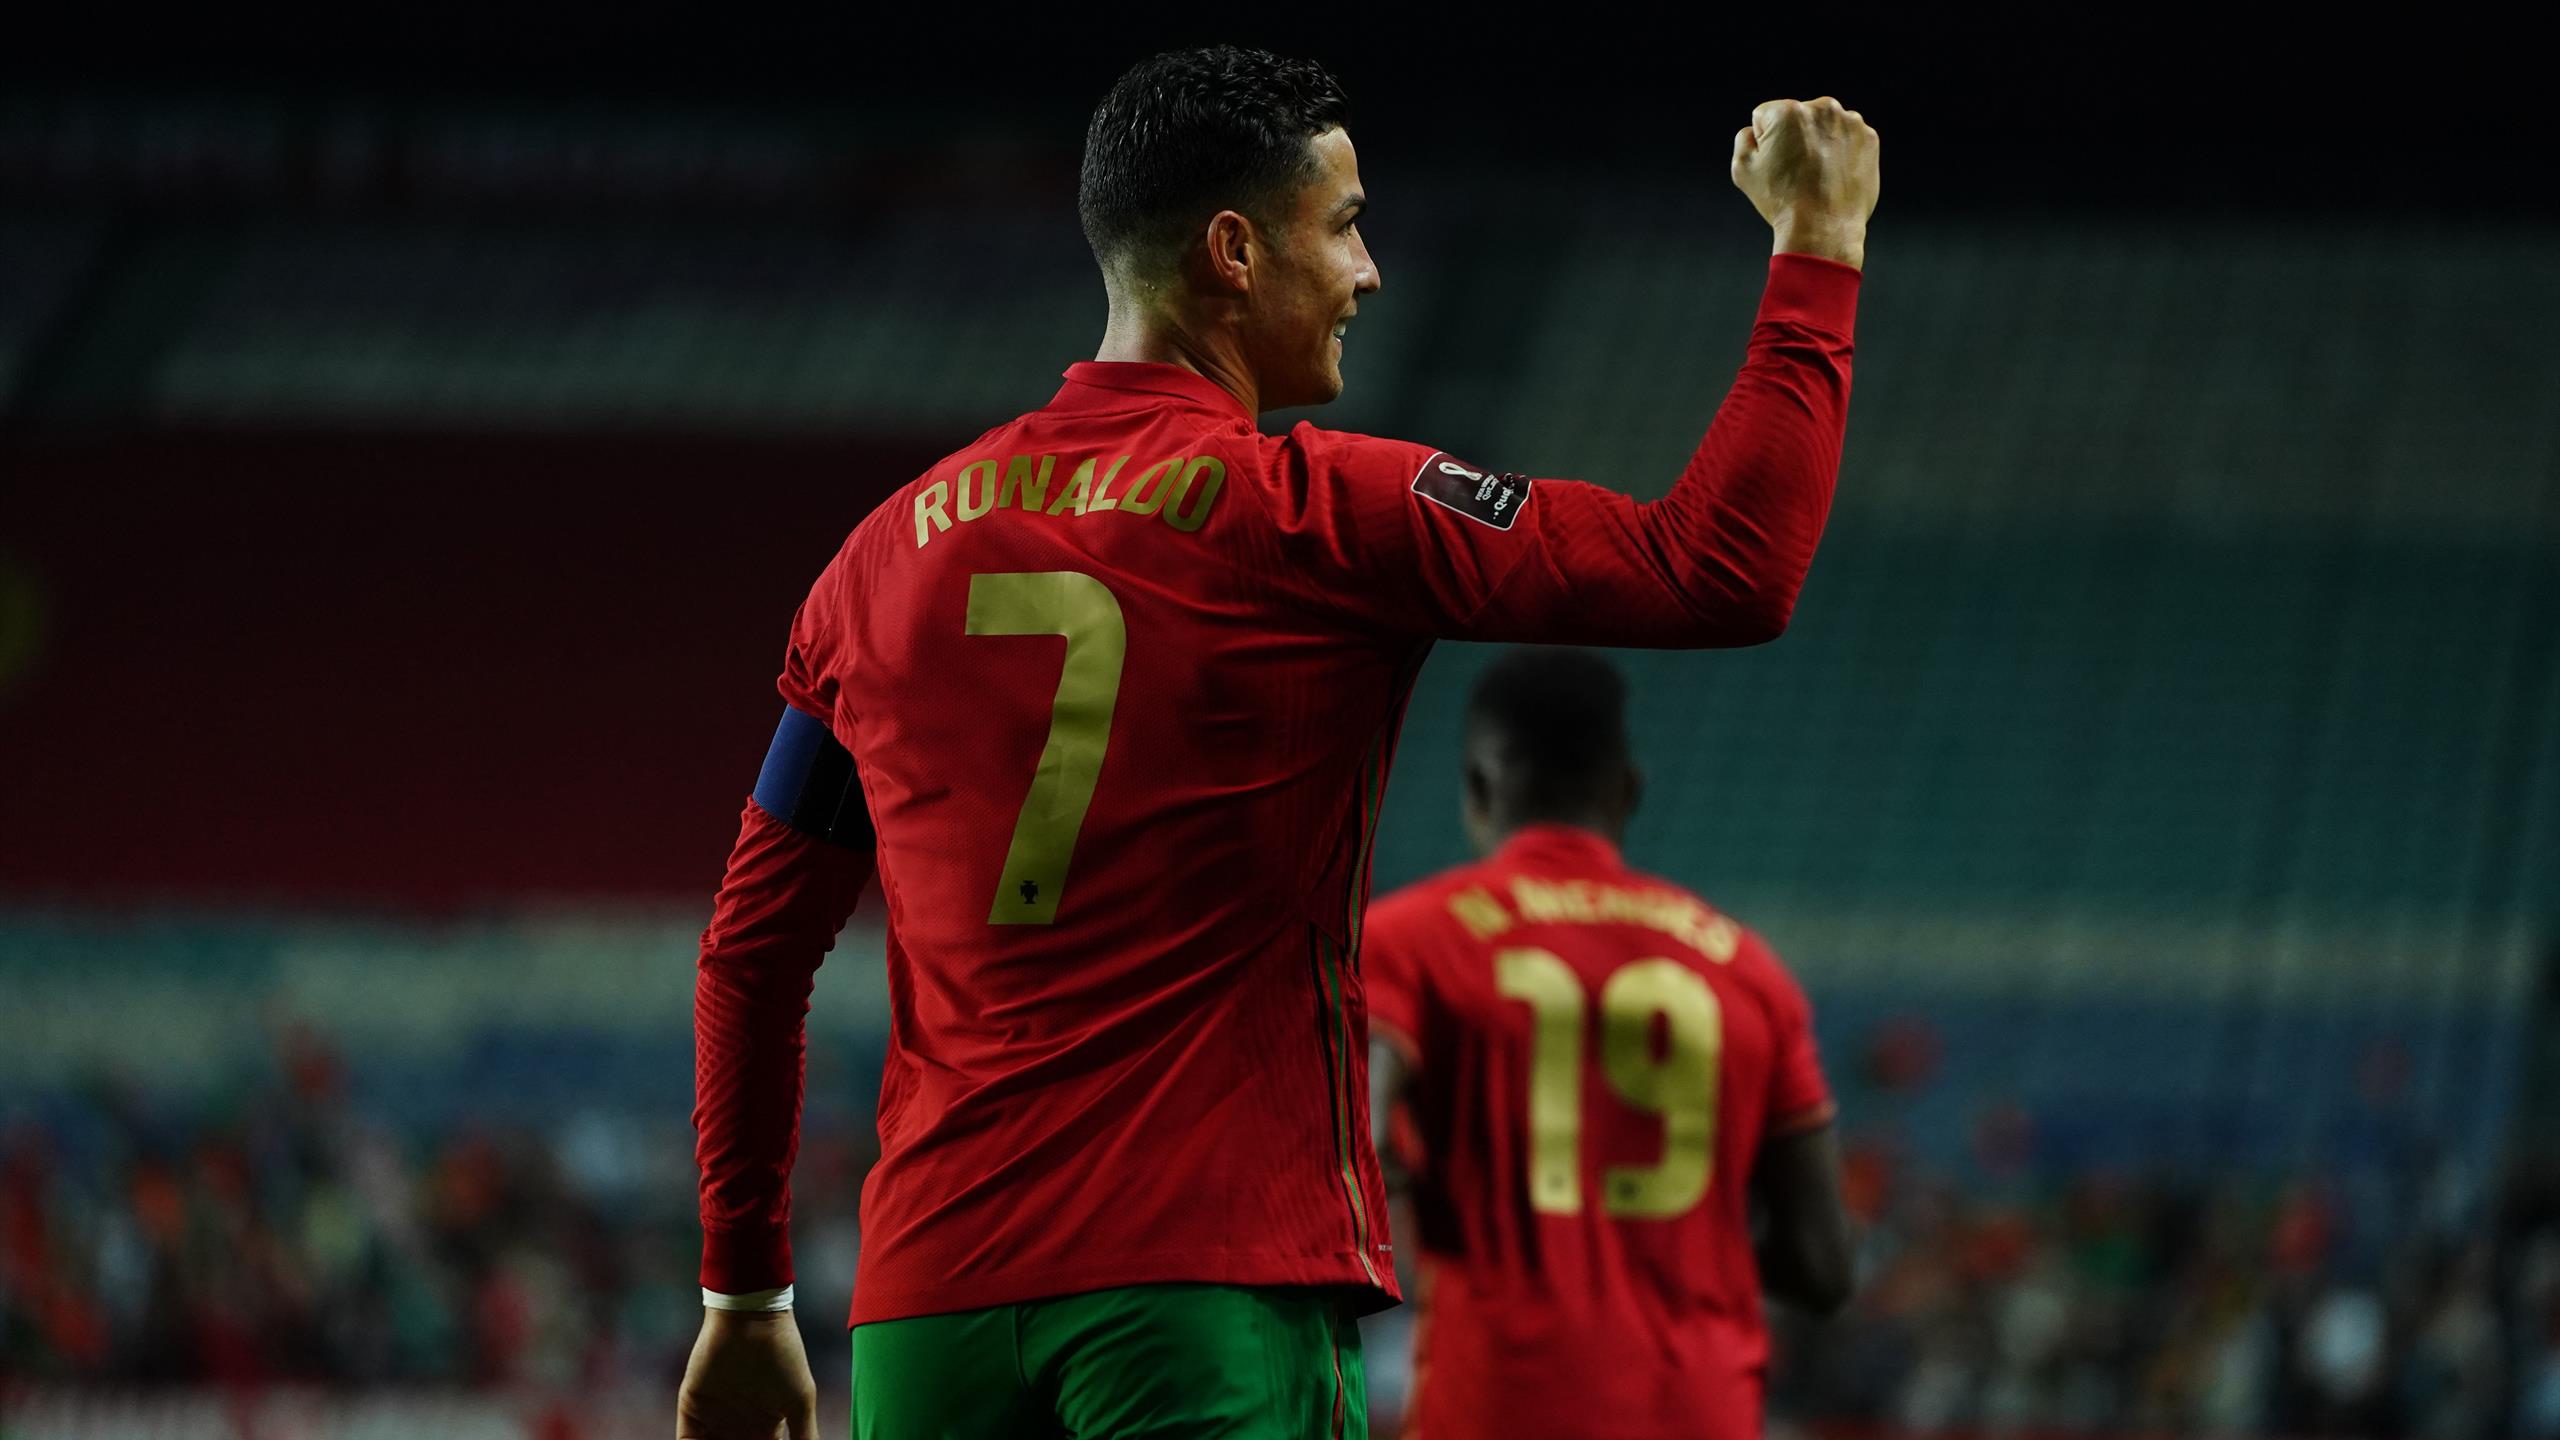 Portugal 5 0 Luxembourg: Cristiano Ronaldo Hits Hat Trick In Rout As Bruno Fernandes Also Scores